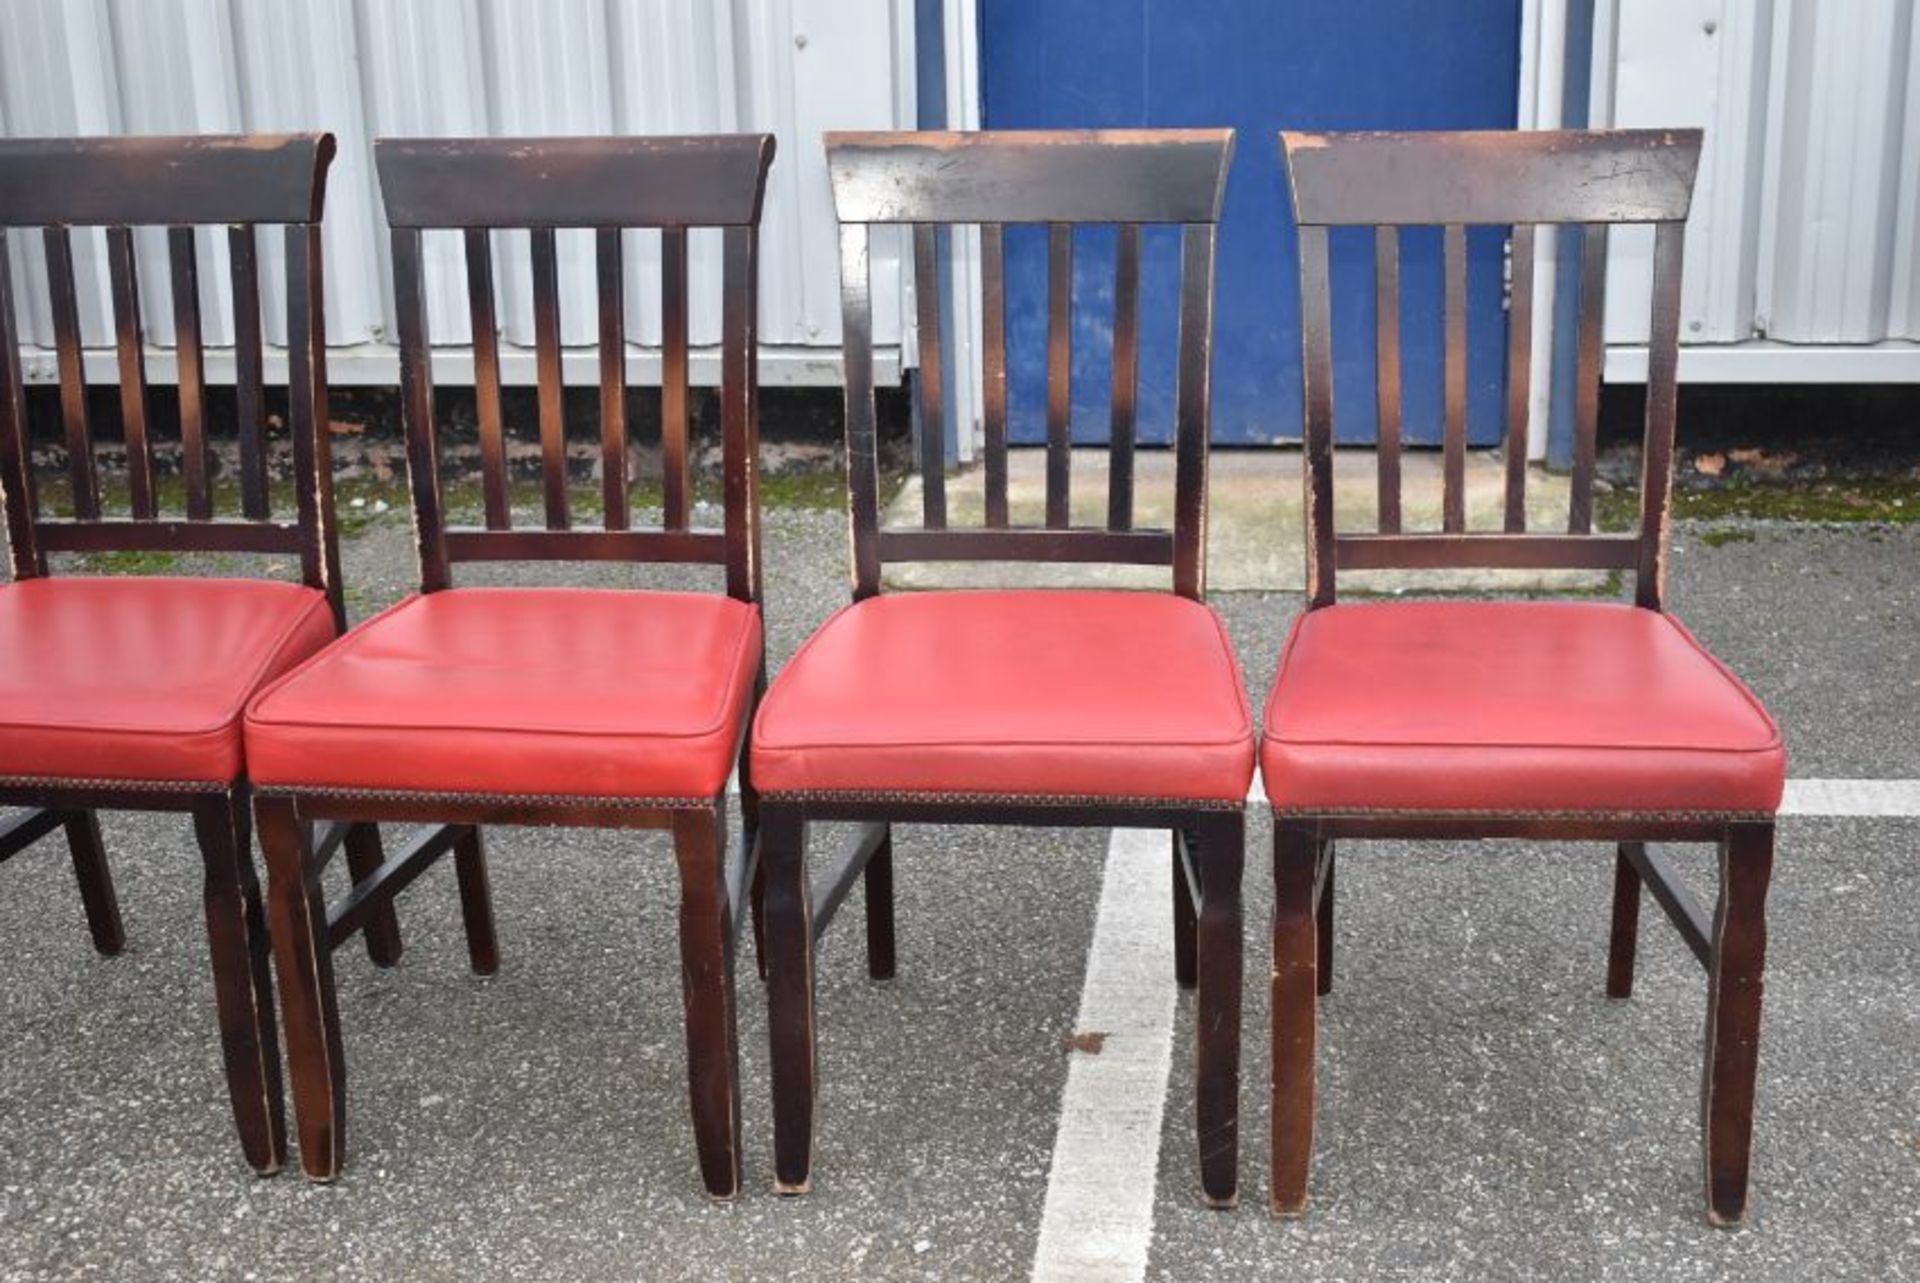 8 x Restaurant Dining Chairs With Dark Stained Wood Finish and Red Leather Seat Pads - Recently - Image 4 of 6